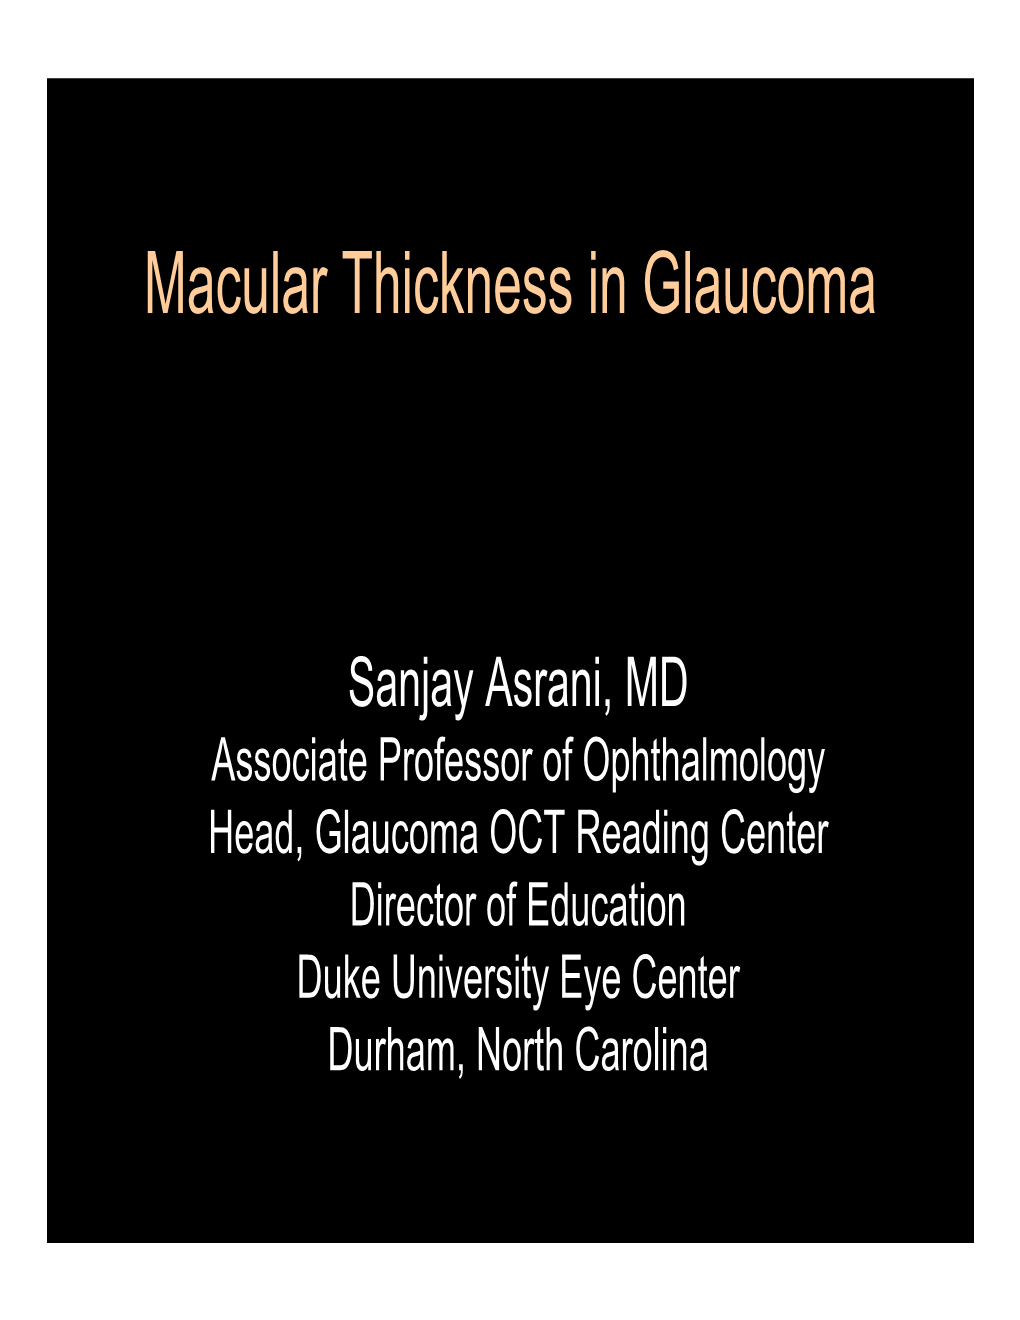 Macular Thickness in Glaucoma